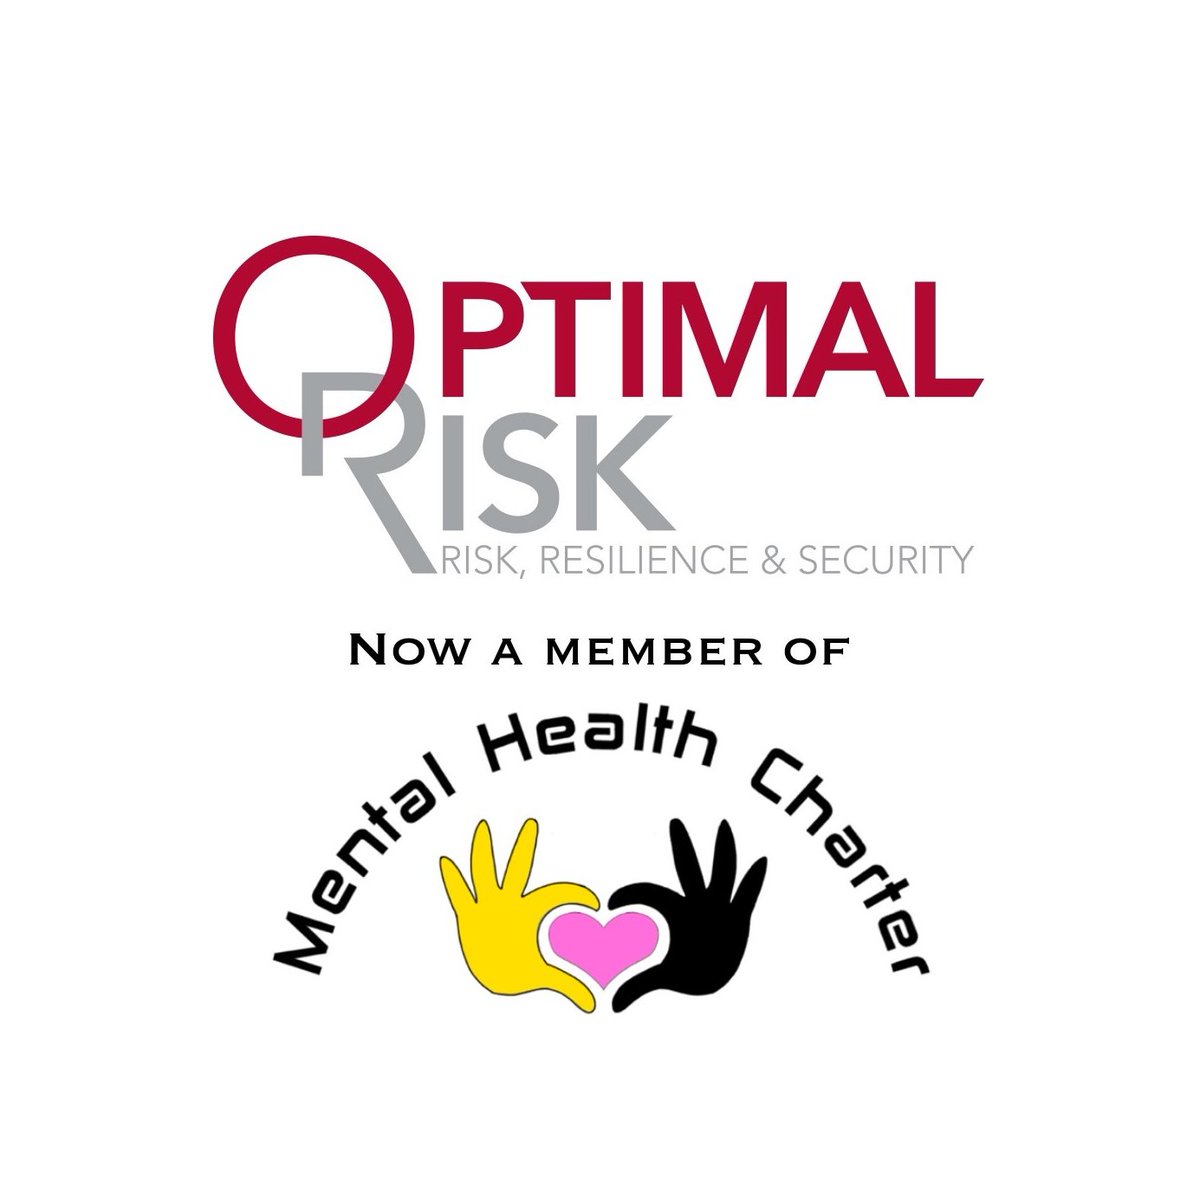 Welcome new member!

We are so pleased to announce that Optimal Risk have signed the Mental Health Charter to show commitment to Mental Health Awareness!

#mentalhealth #mentalhealthawarness #suicideprevention #security #stampoutthestigma #securityworkers